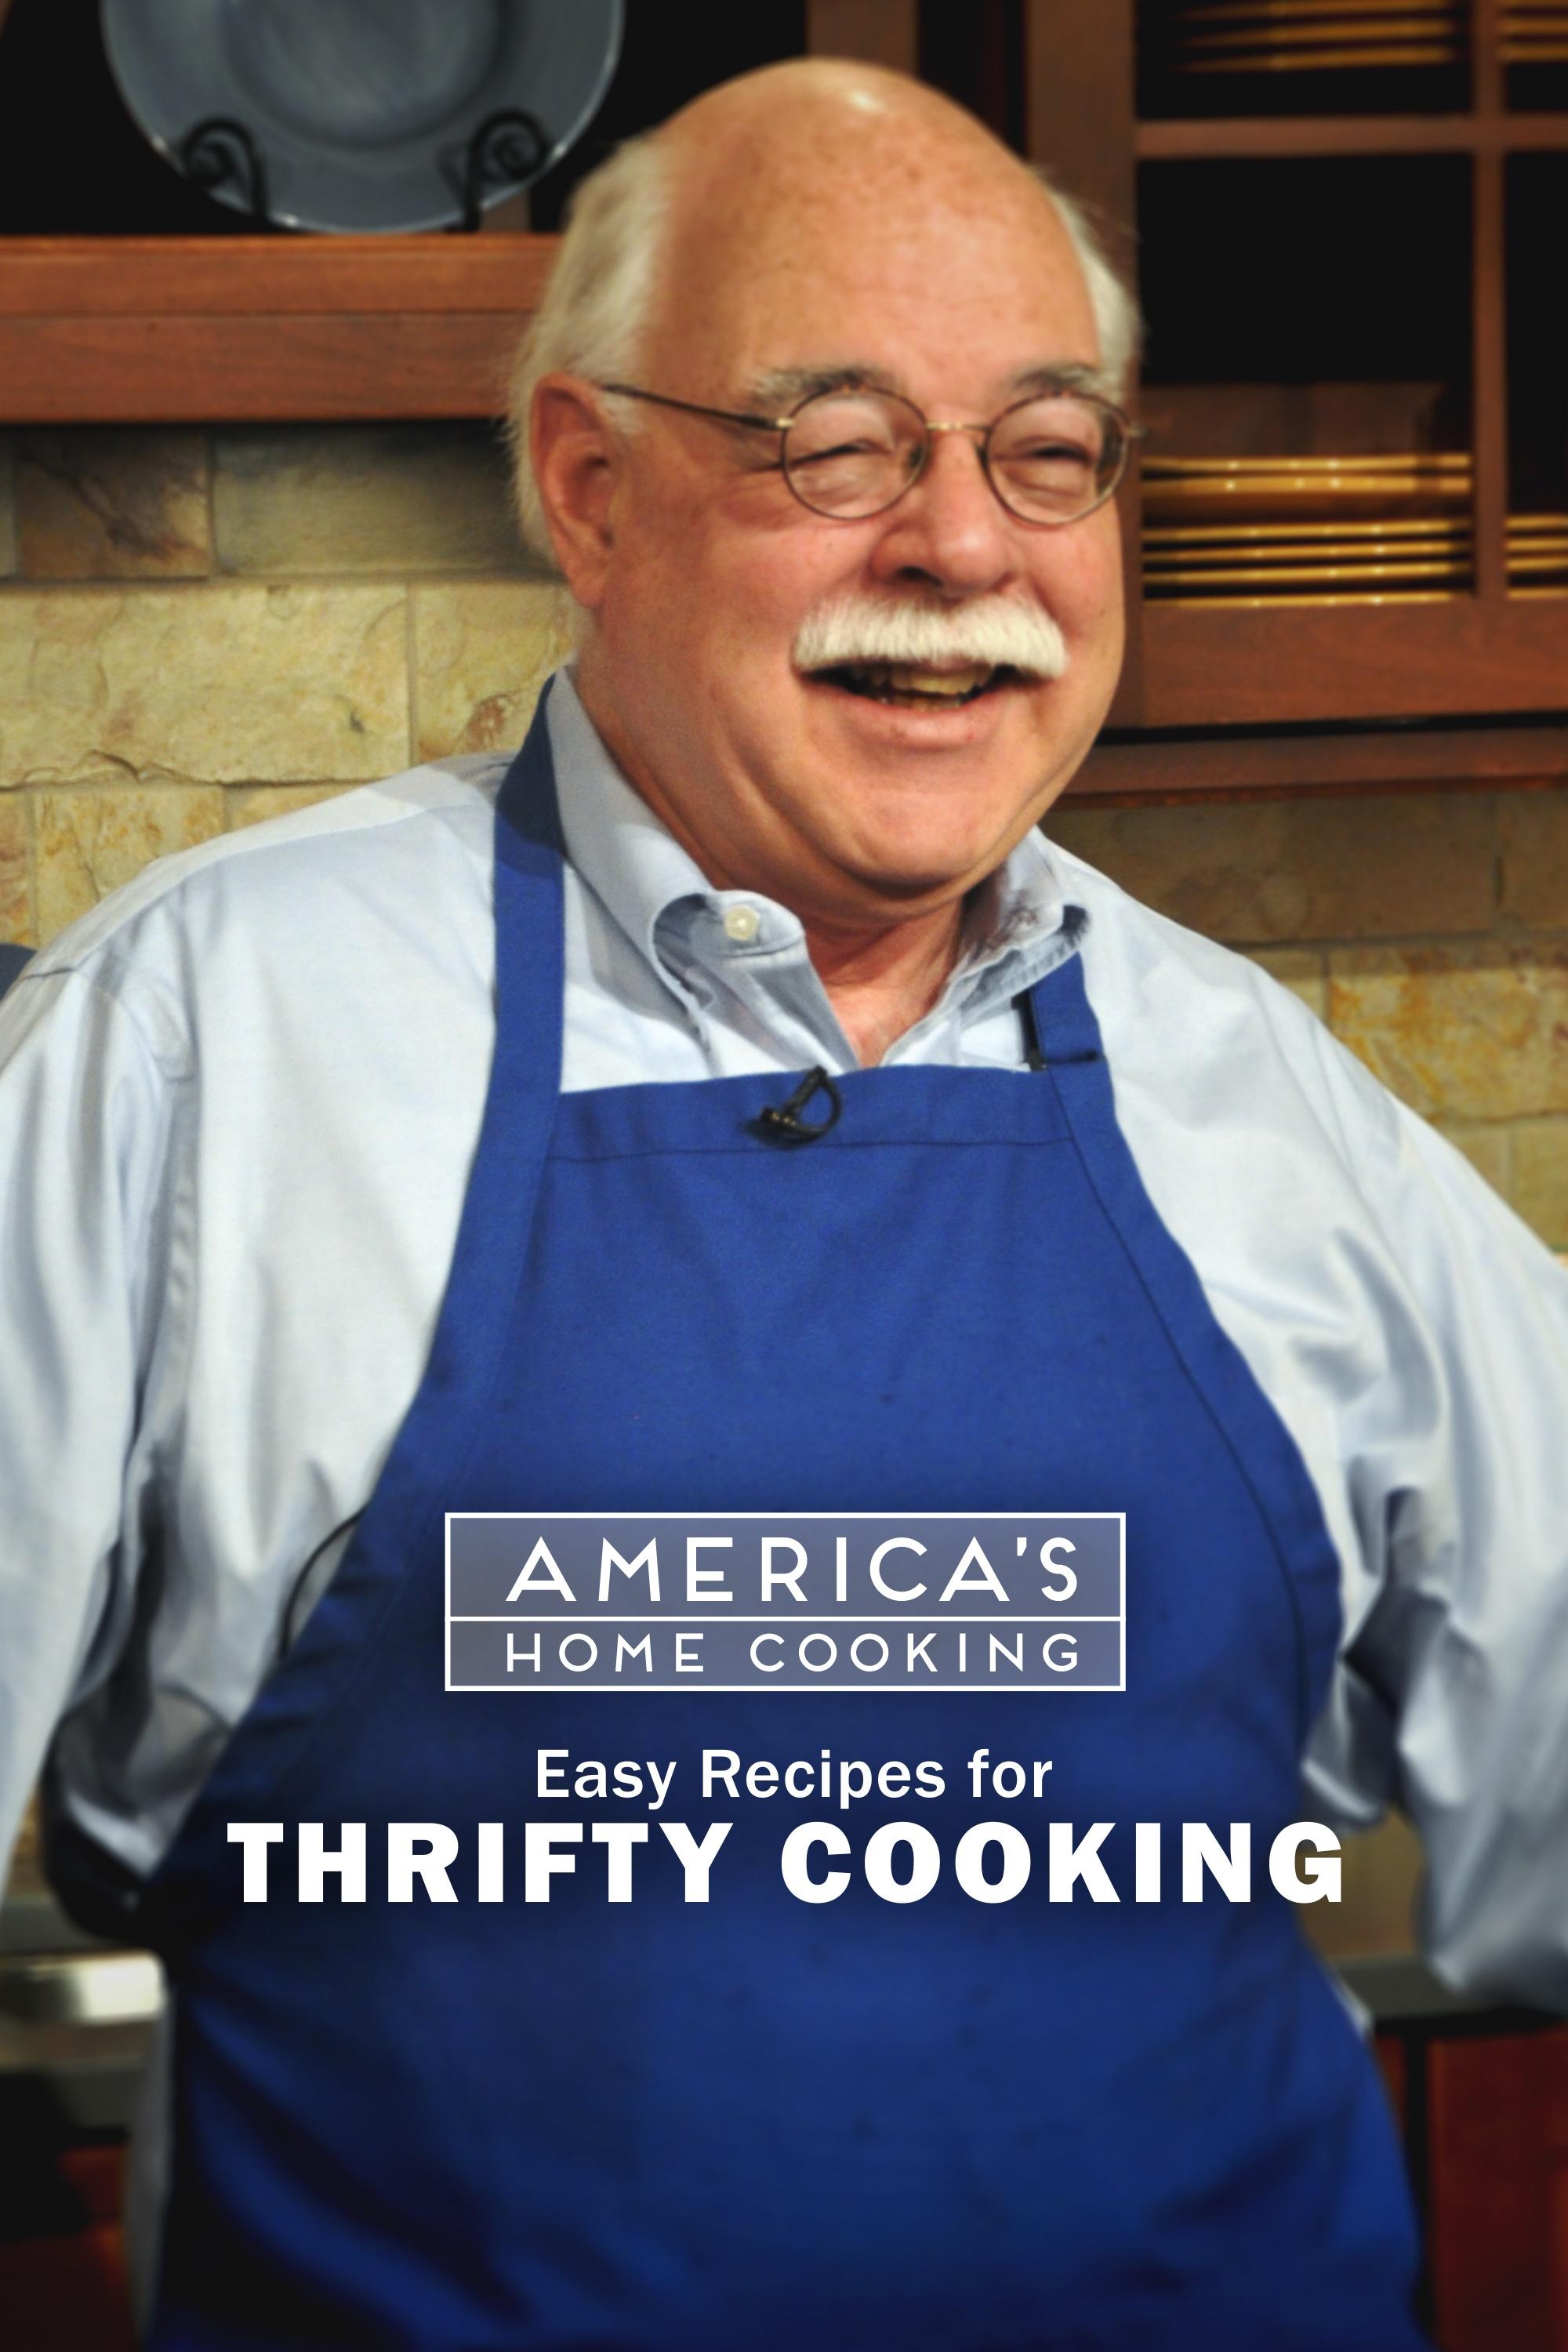 America’s Home Cooking: Thrifty Cooking